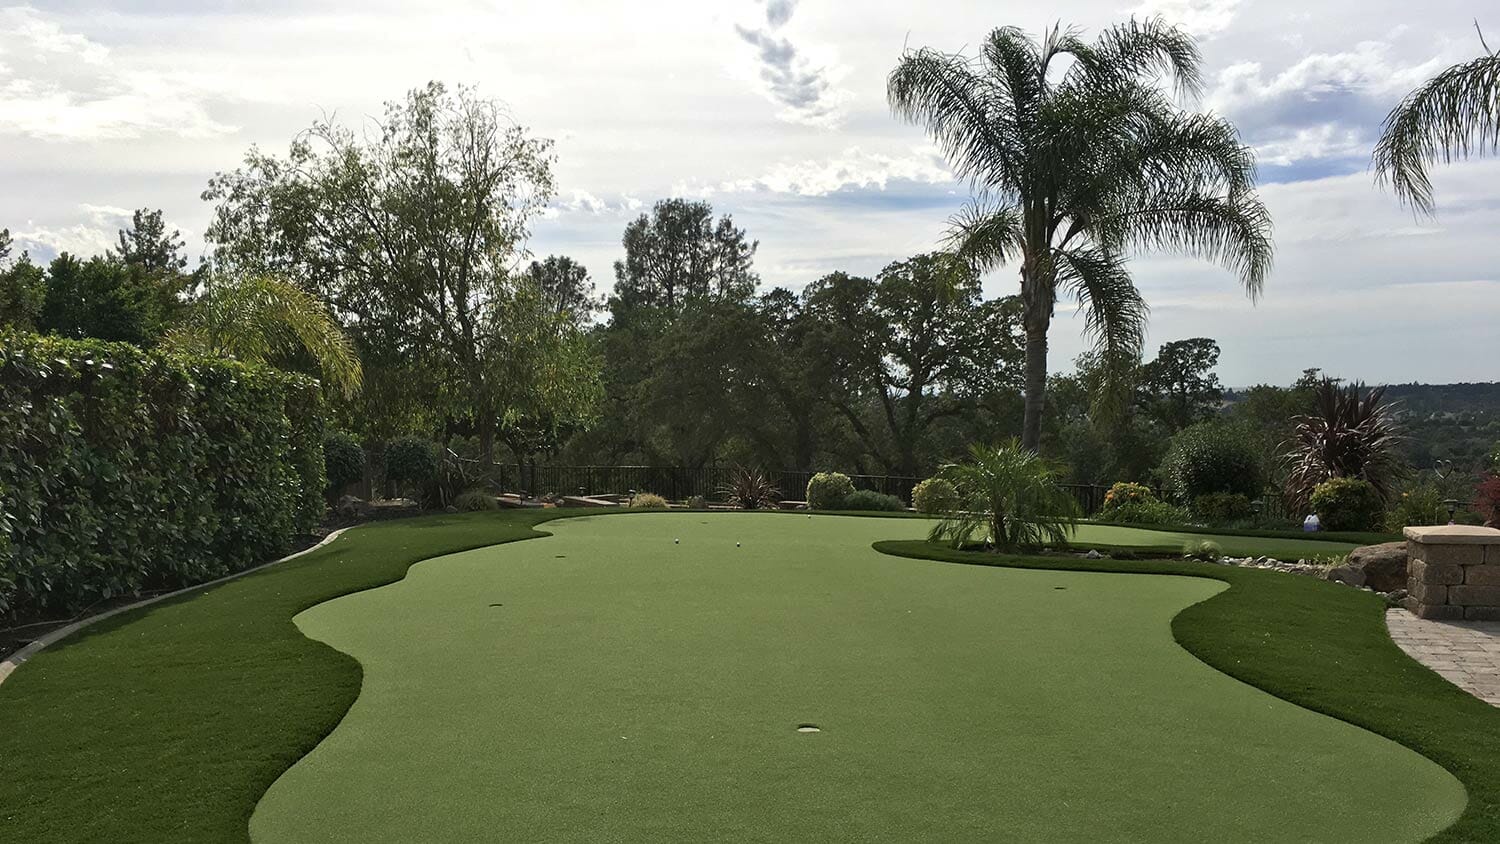 Putting Green & Artificial Turf Landscaping - Roseville, CA